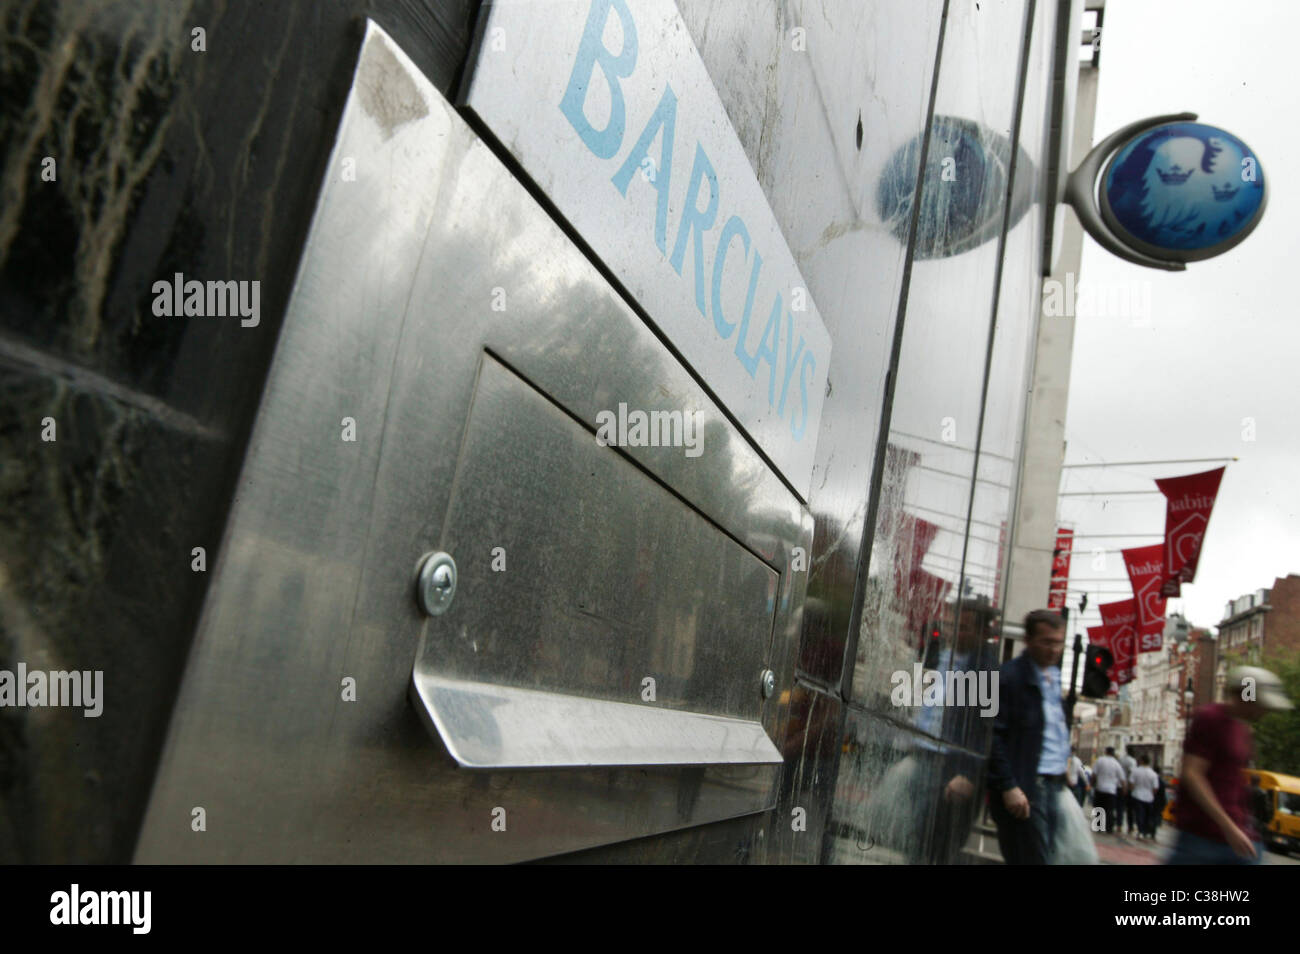 A Barclays branch on Tottenham Court Road. Stock Photo